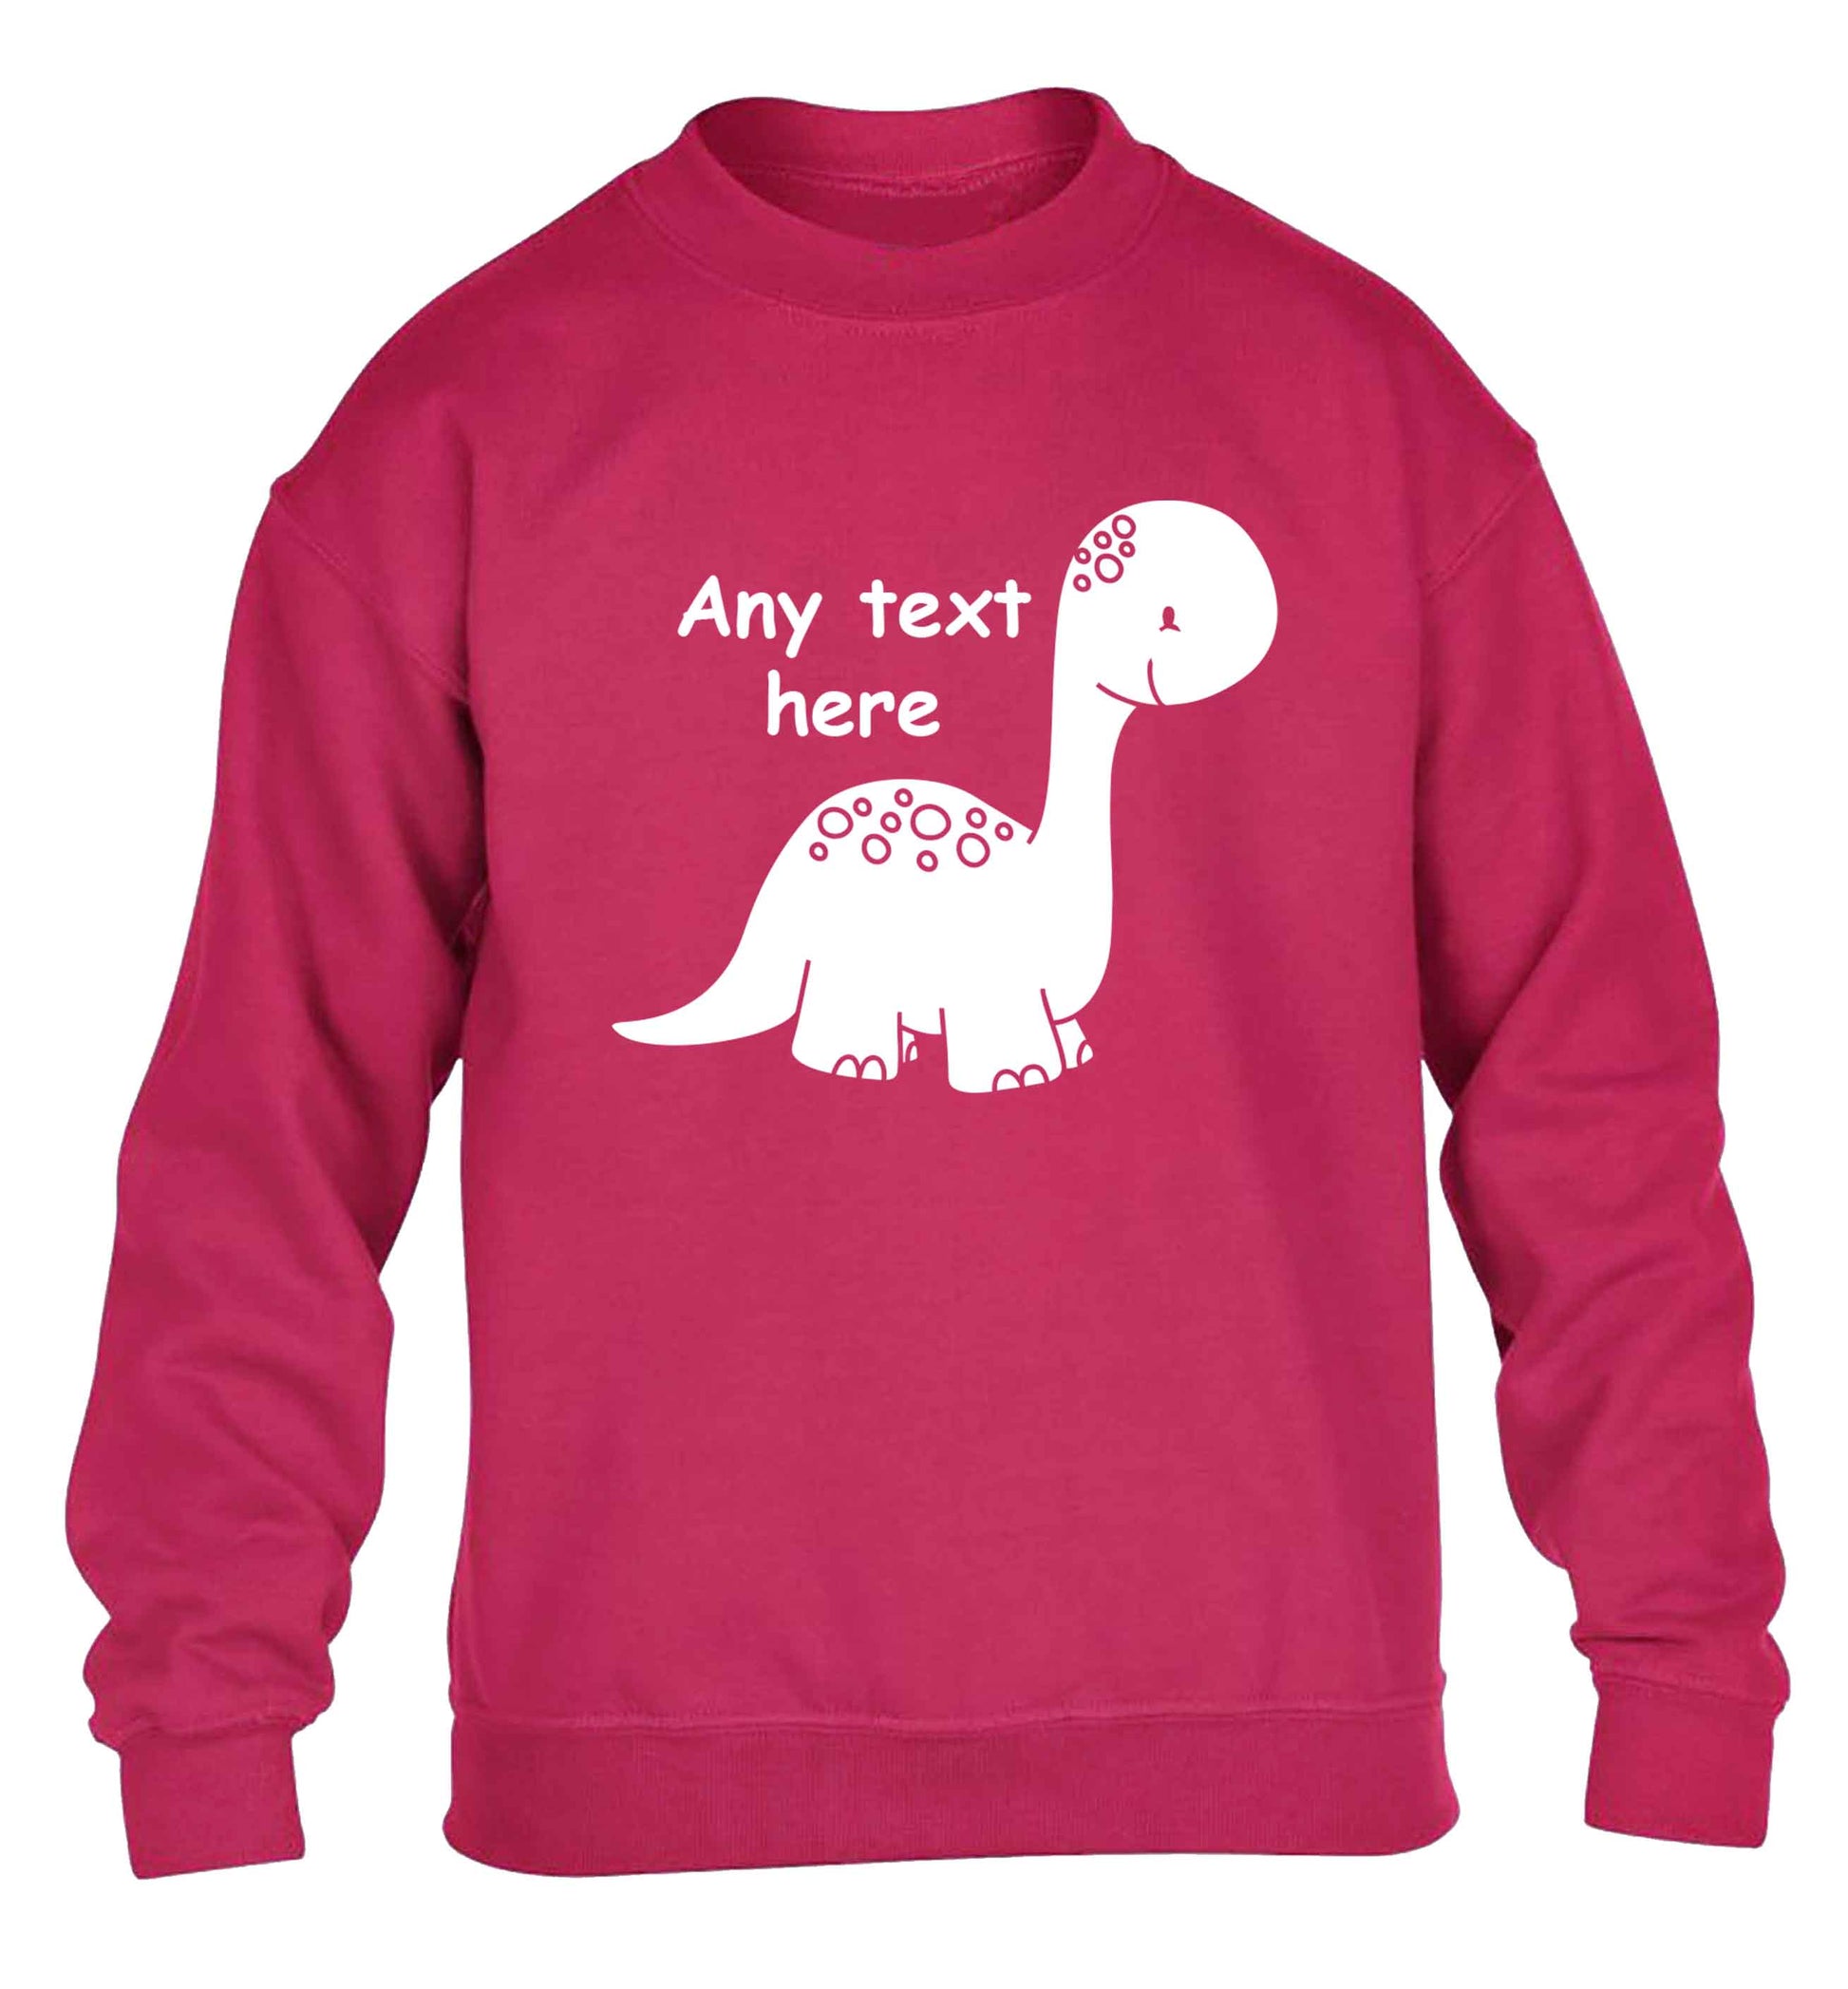 Dinosaur any text children's pink sweater 12-13 Years